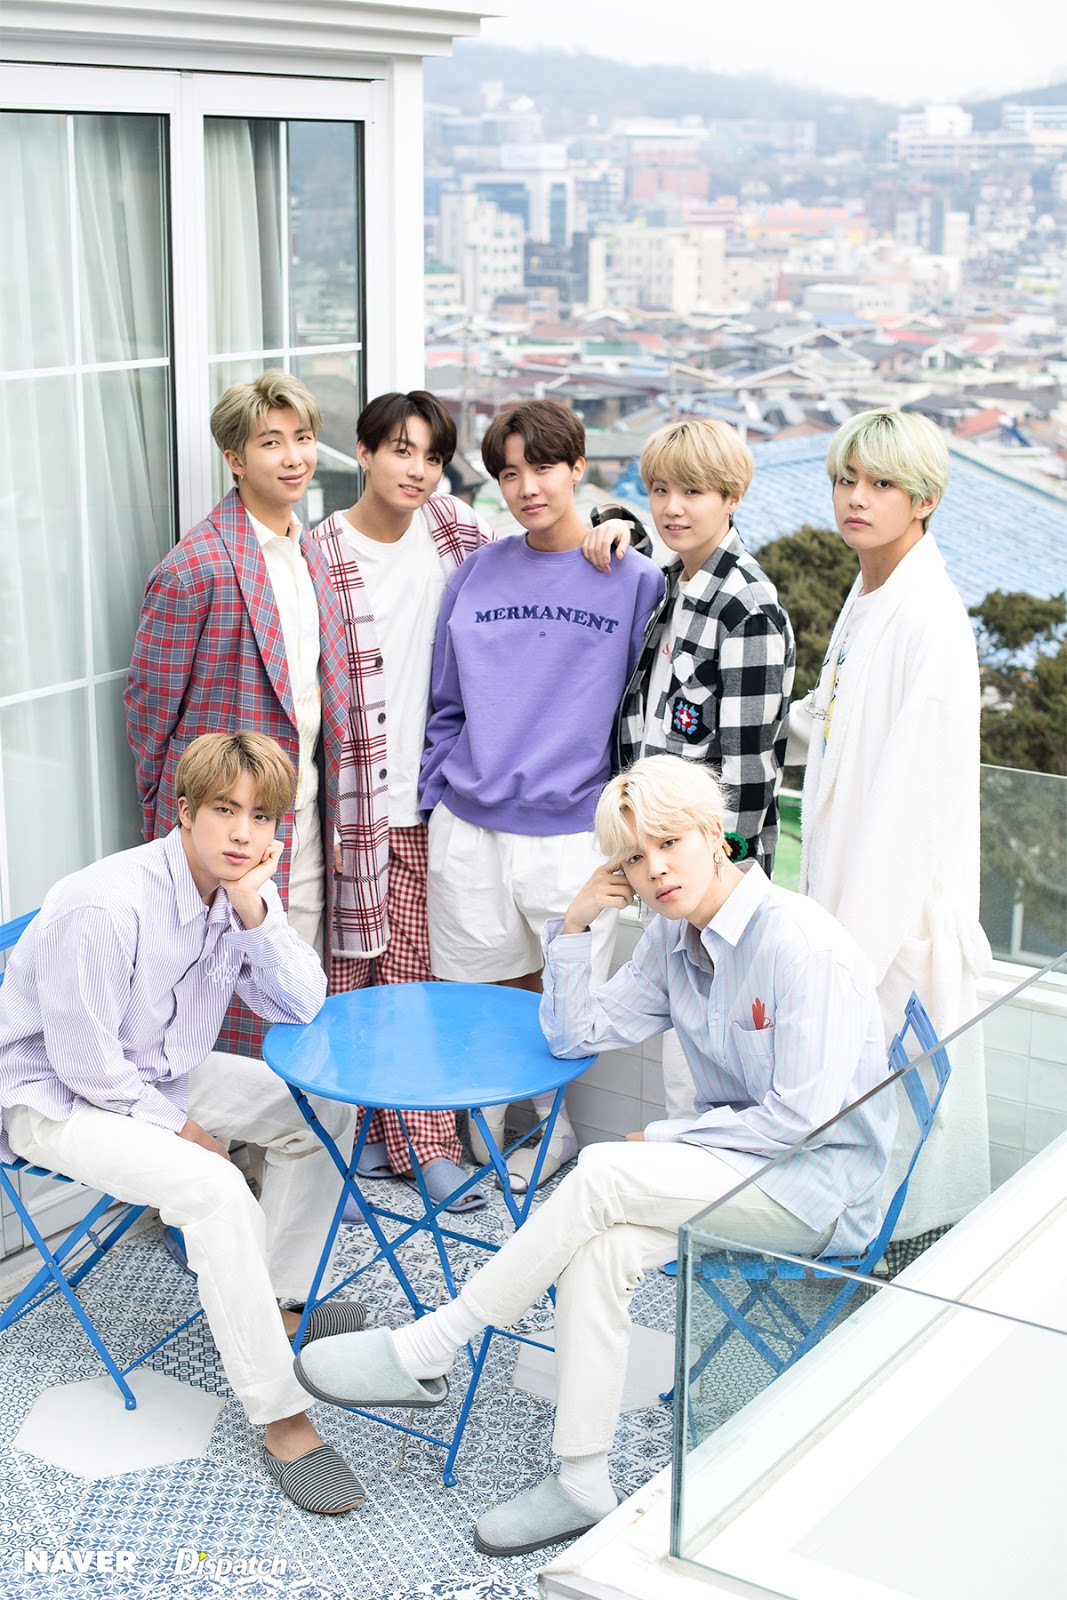 Naver x Dispatch: BTS White Day Special Photoshoot — Group + Subunit Shots